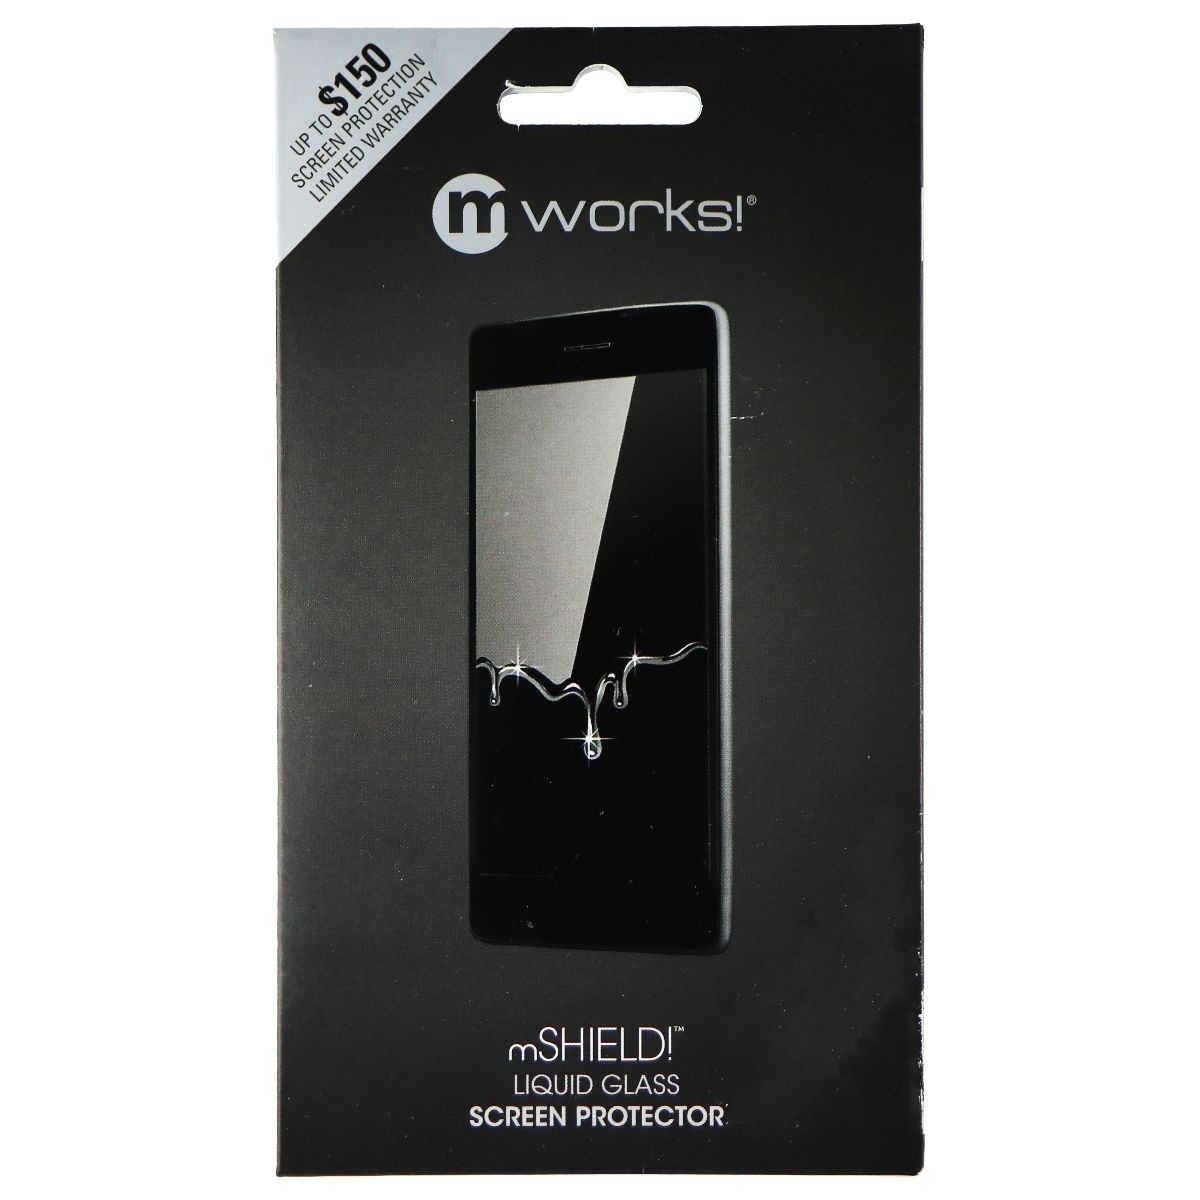 MWorks! MSHIELD! Liquid Glass Screen Protector For All Phones & Tablets